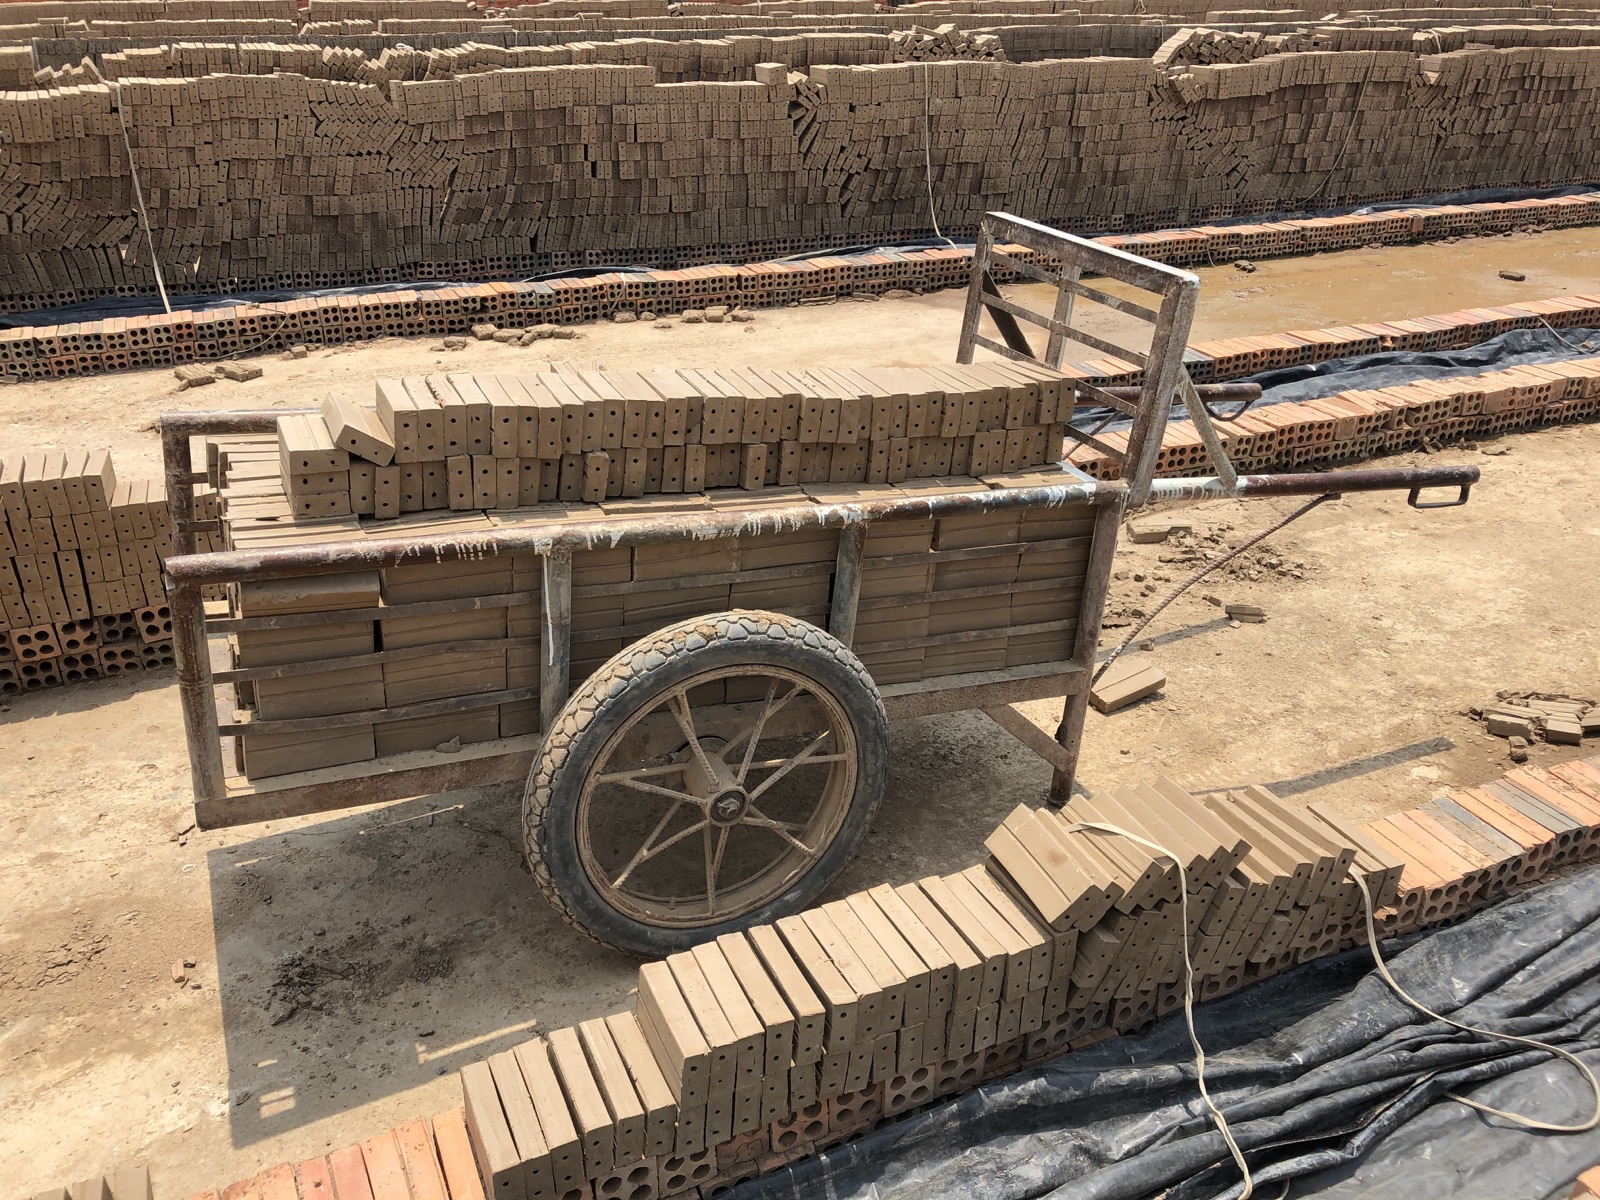 Bricks stacked in a cart at a factory in Cambodia's Kandal province in March 2019.